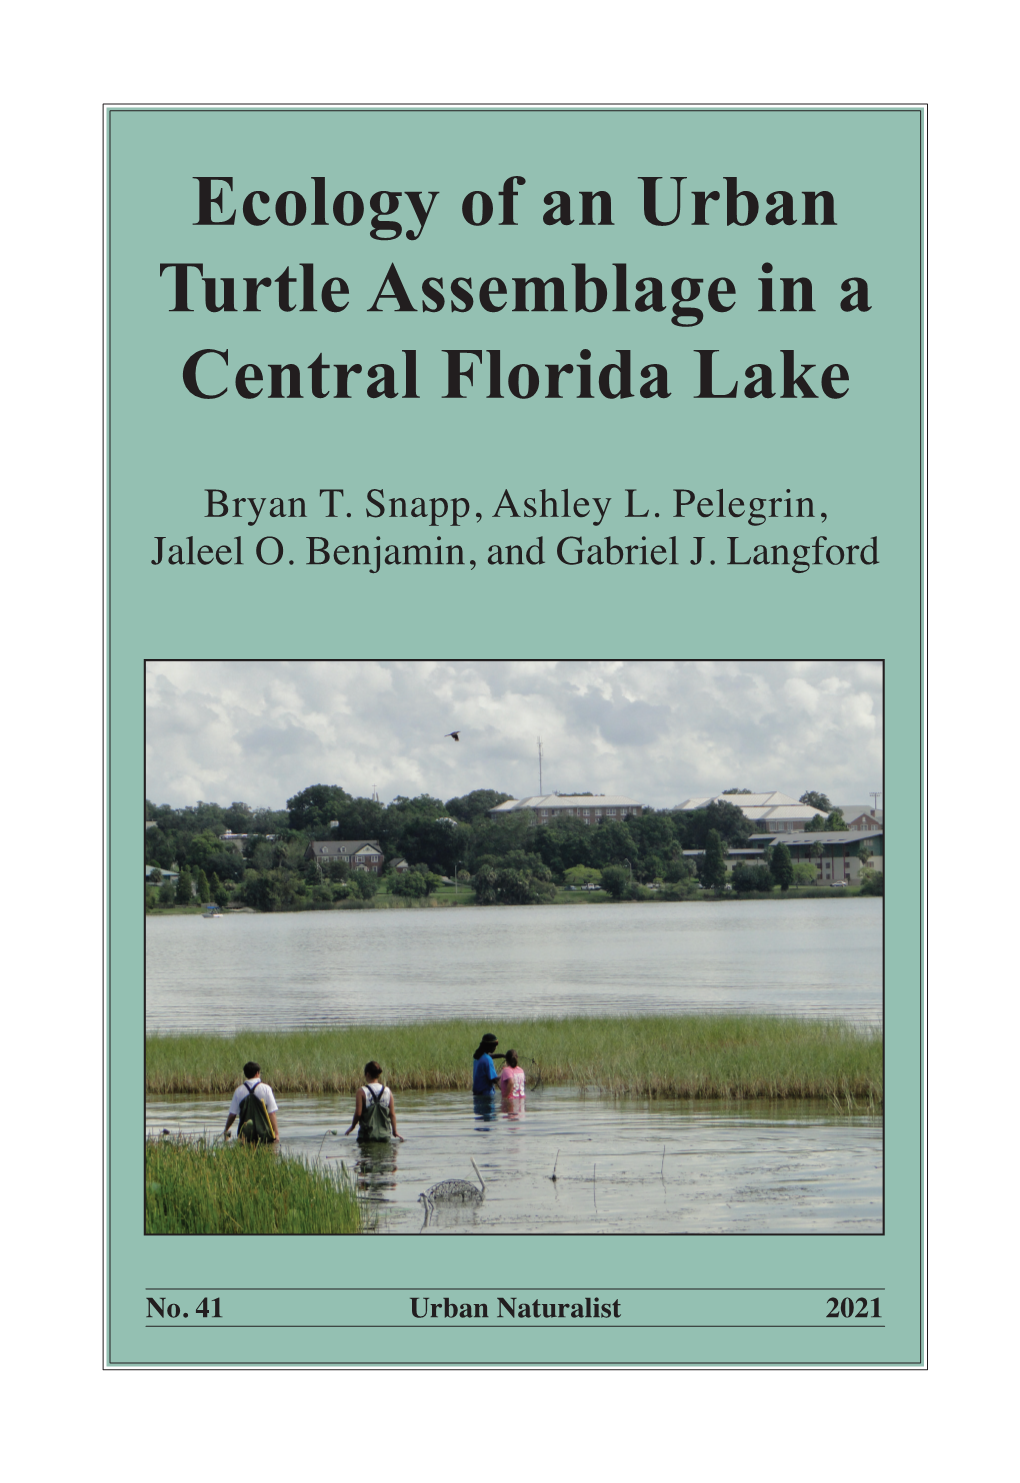 Ecology of an Urban Turtle Assemblage in a Central Florida Lake